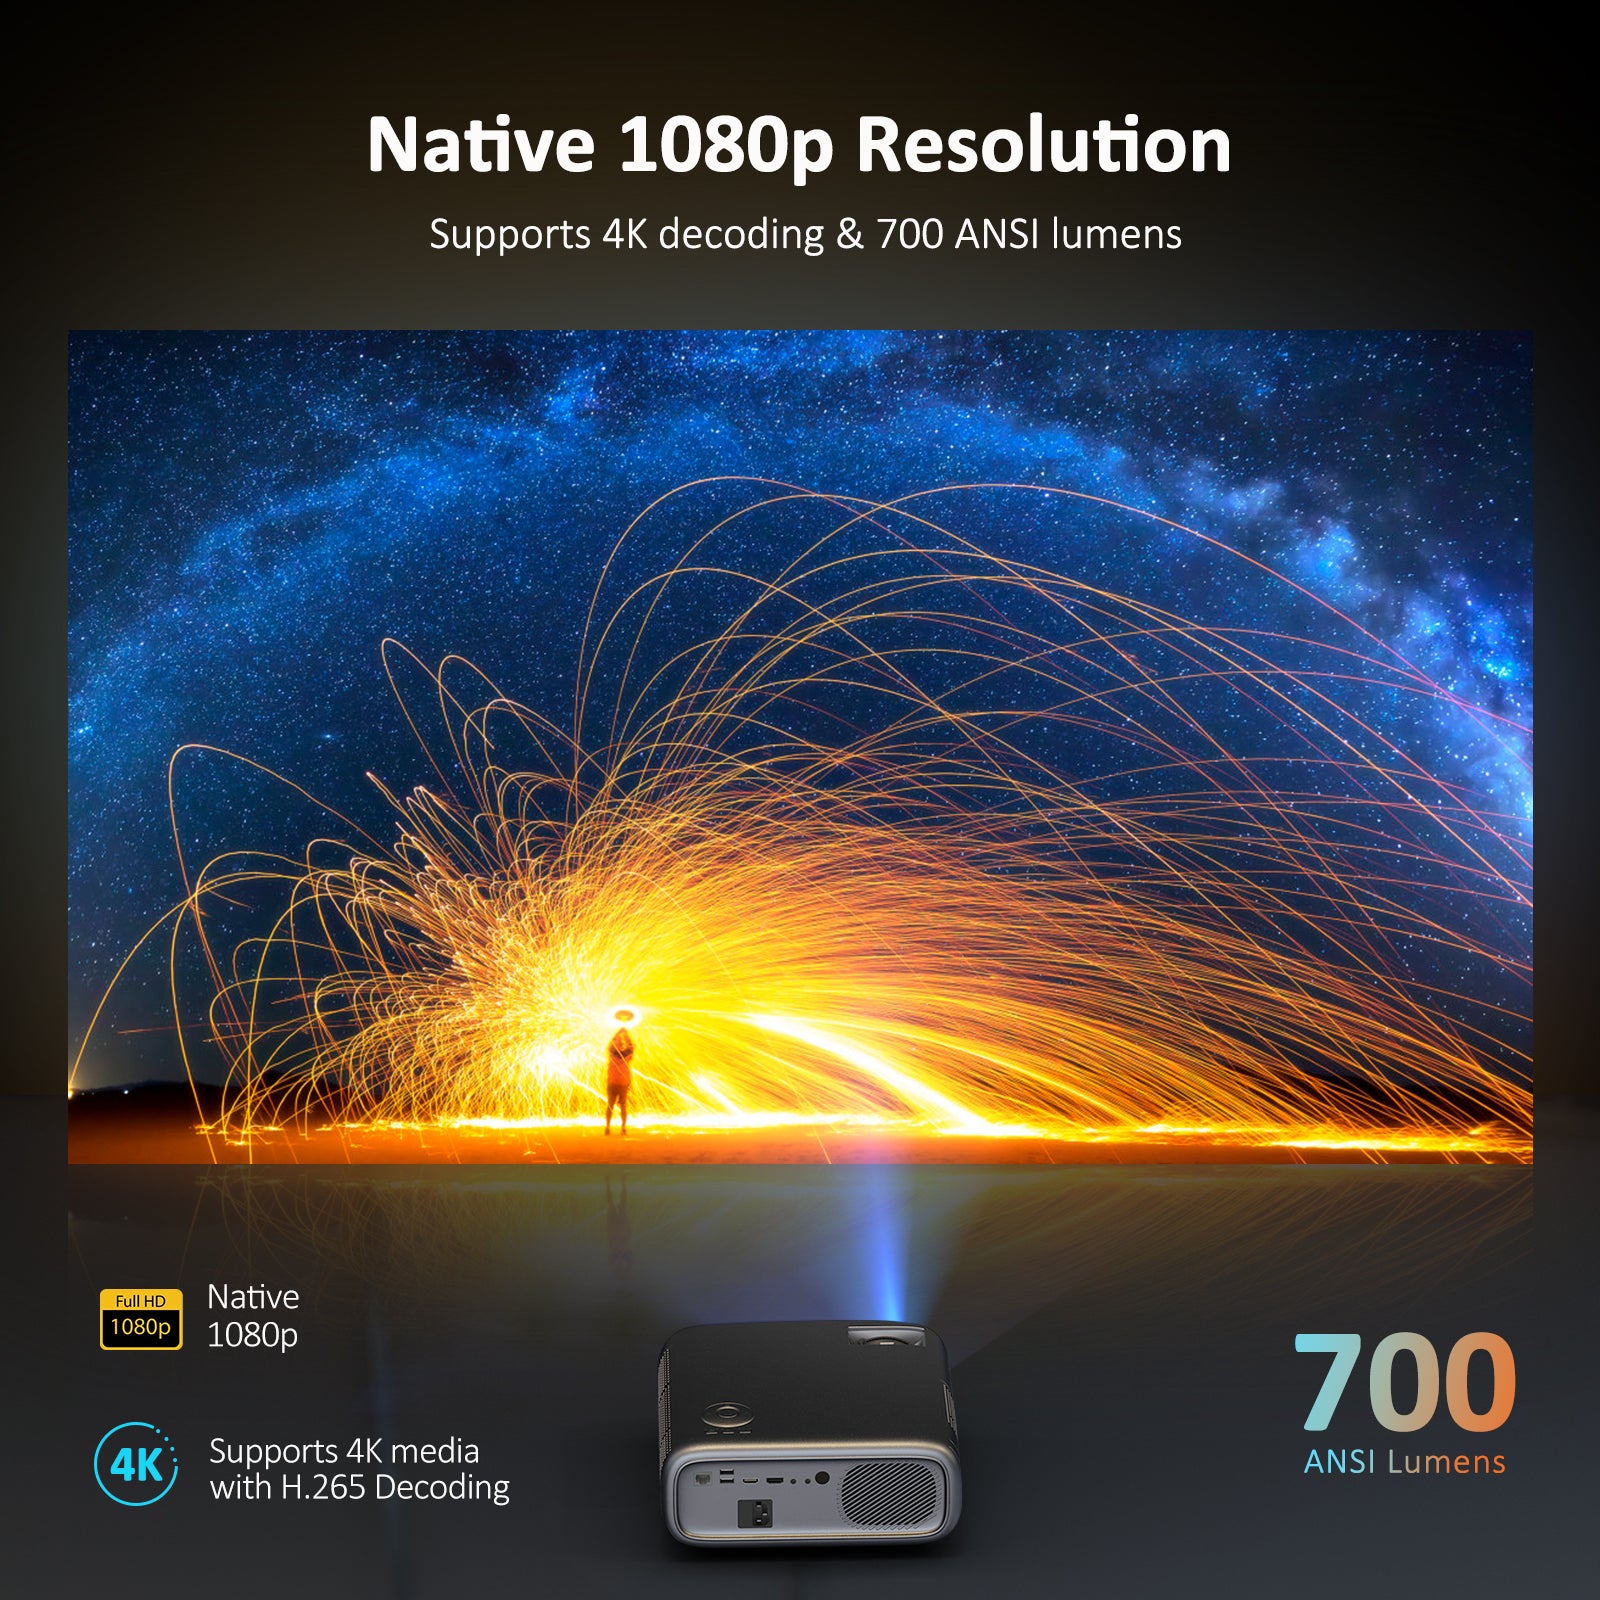 The projector has a native 1080P resolution, supports 4K media with H.265 decoding, 700 ANSI lumens